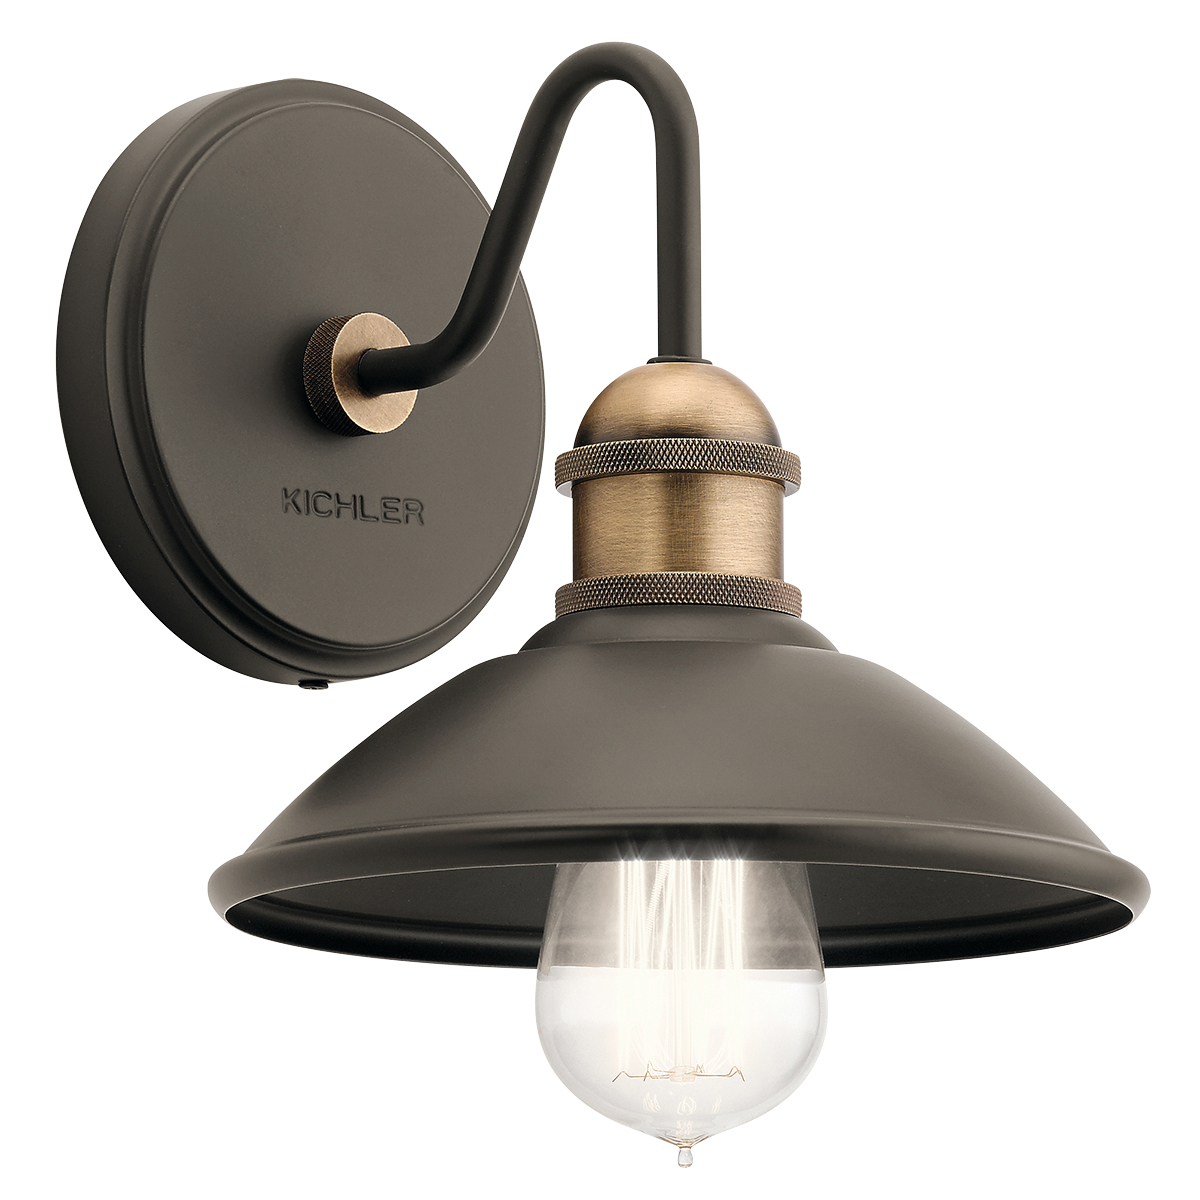 Bring a touch of the outdoors in with Clyde's 1-light 7.5in. wall sconce. An Olde Bronze finish, a vintage-inspired socket and diamond knurl banding enhance the industrial look.